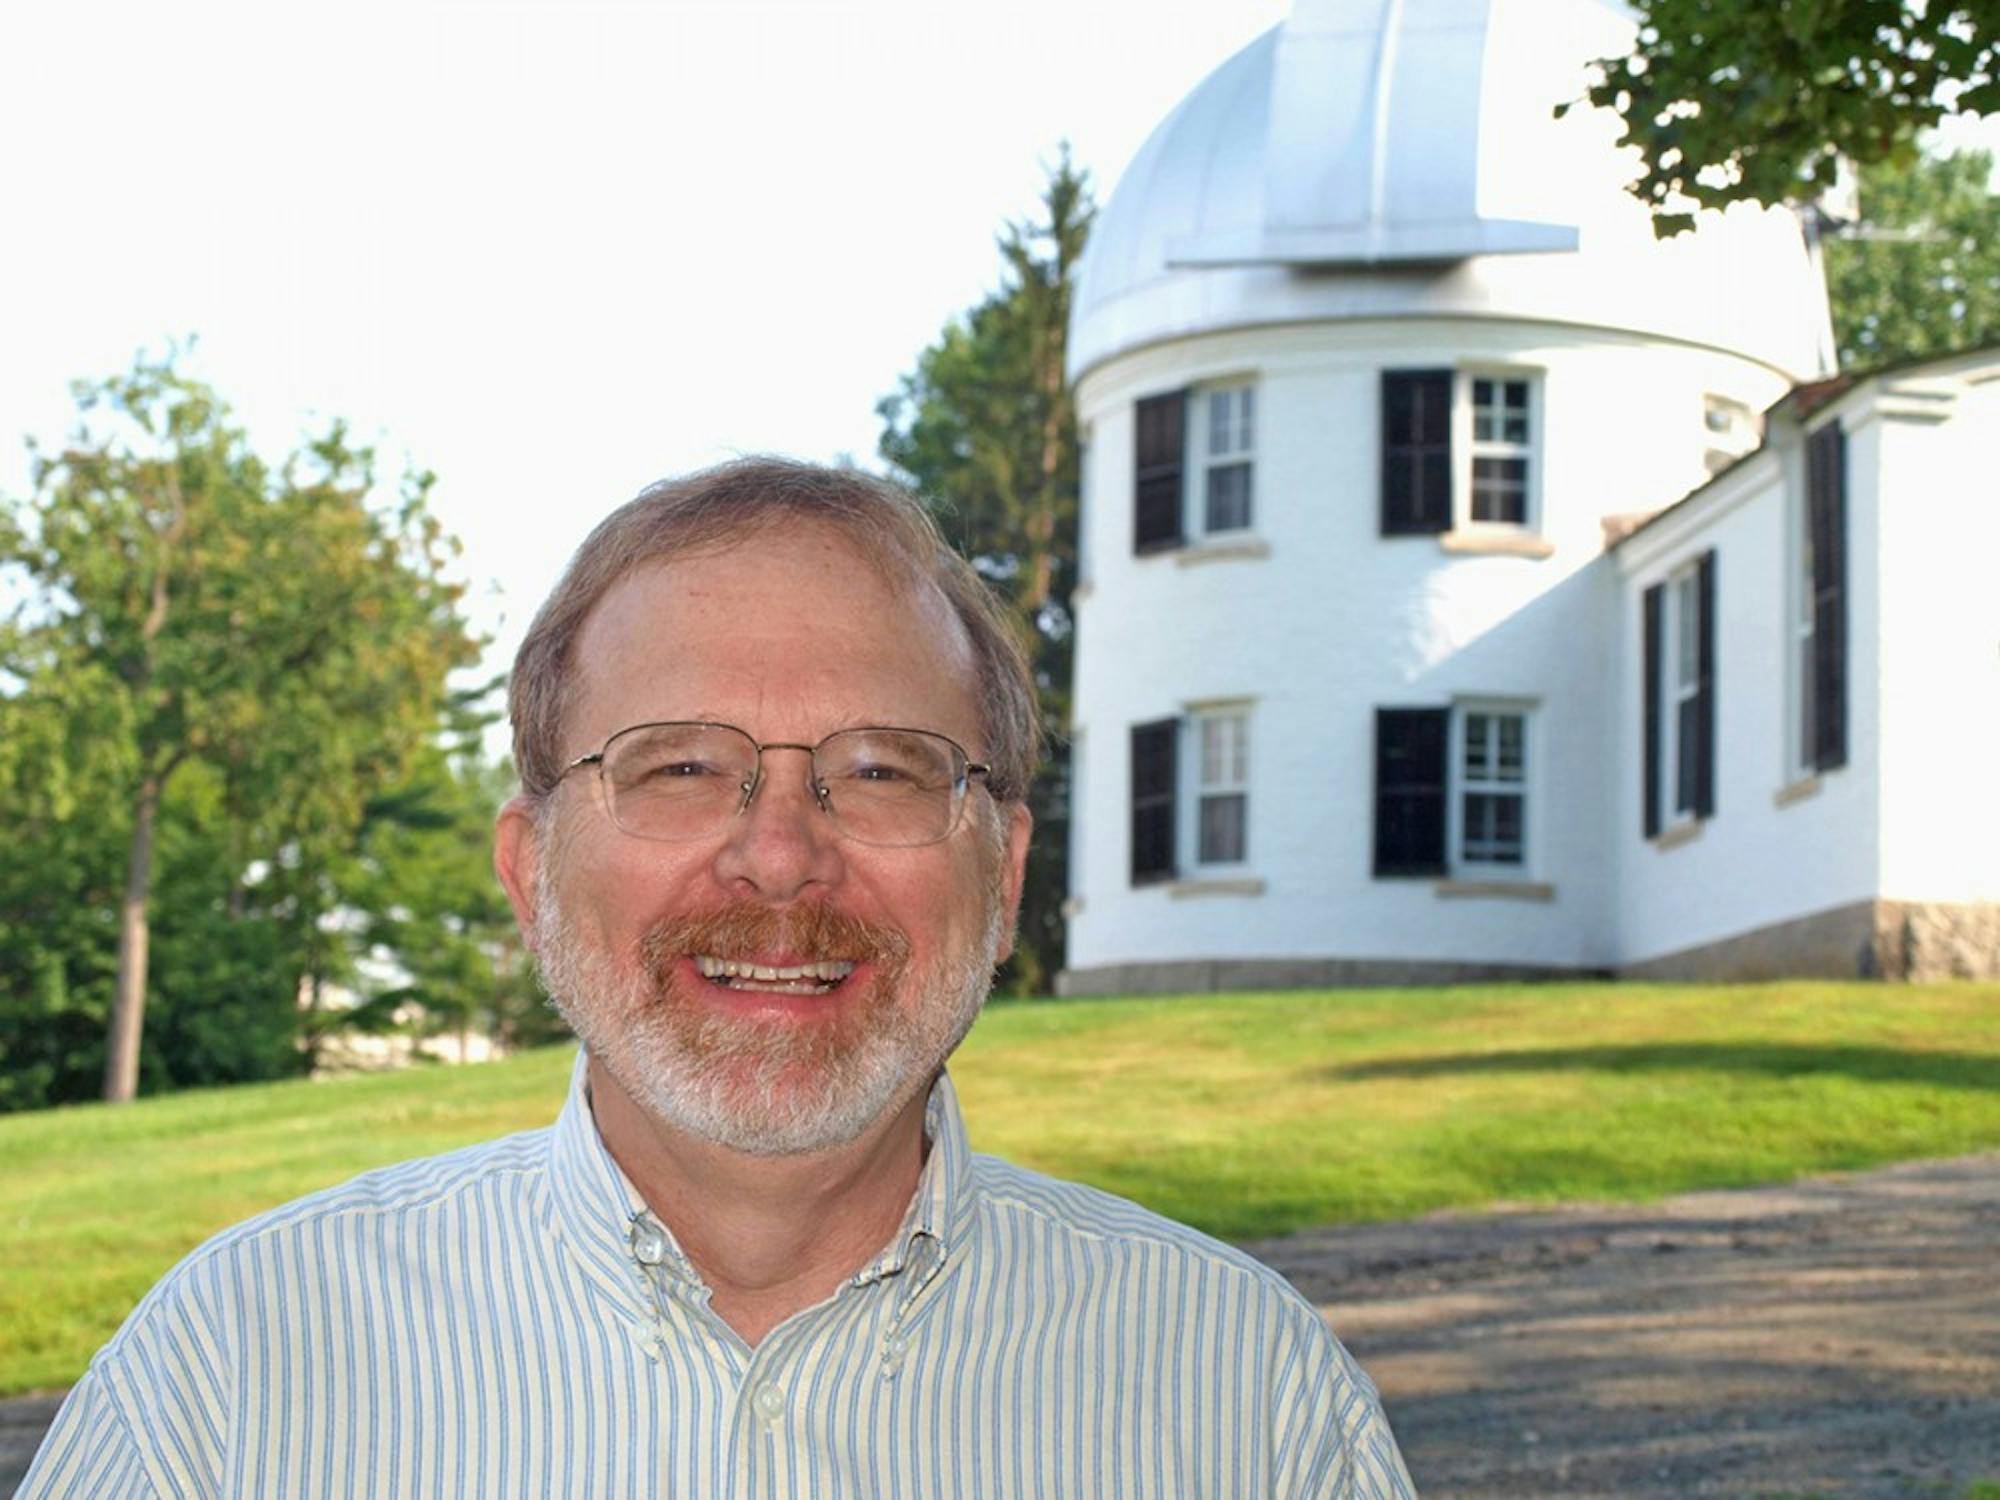 Yorke Browne, physics professor, has been teaching here since 2003.